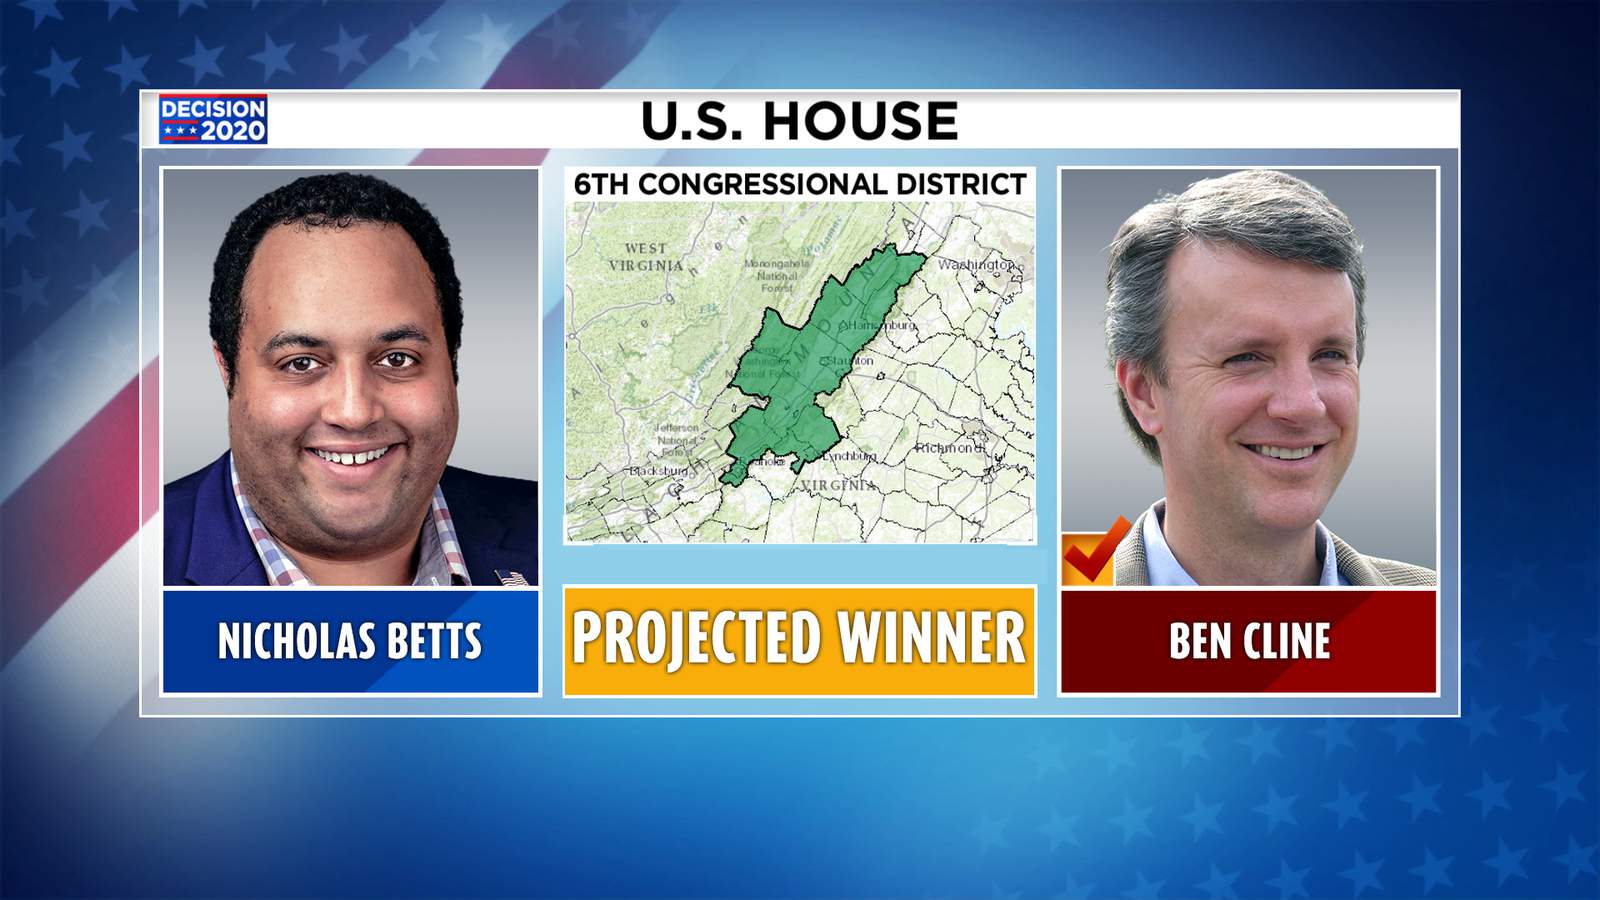 Ben Cline projected to win reelection in Virginia’s 6th Congressional District, according to NBC News